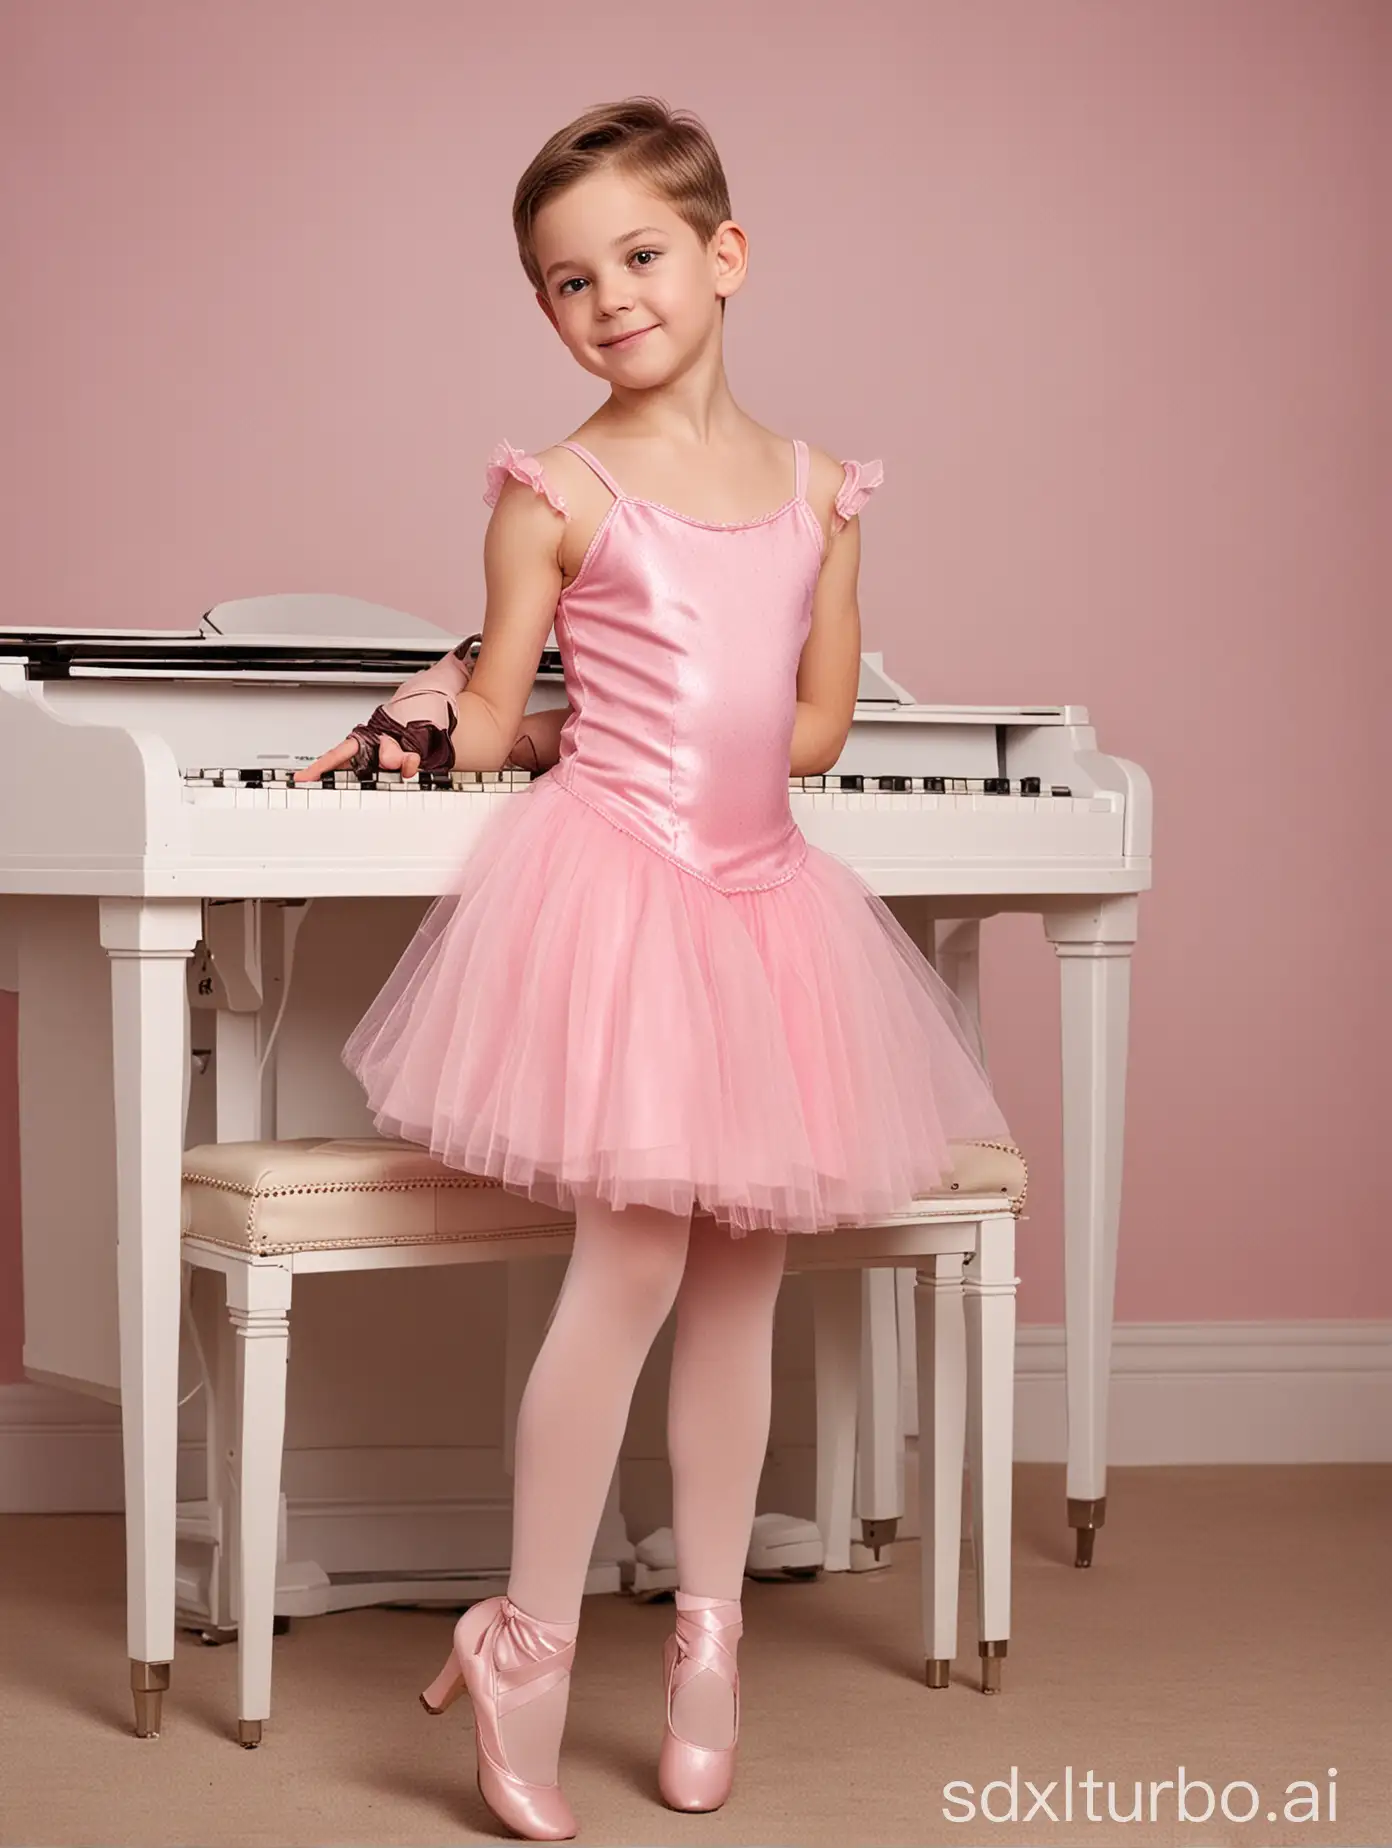 Adorable-11YearOld-Boy-Nervously-Plays-Piano-in-Pink-Ballet-Dress-and-High-Heel-Boots